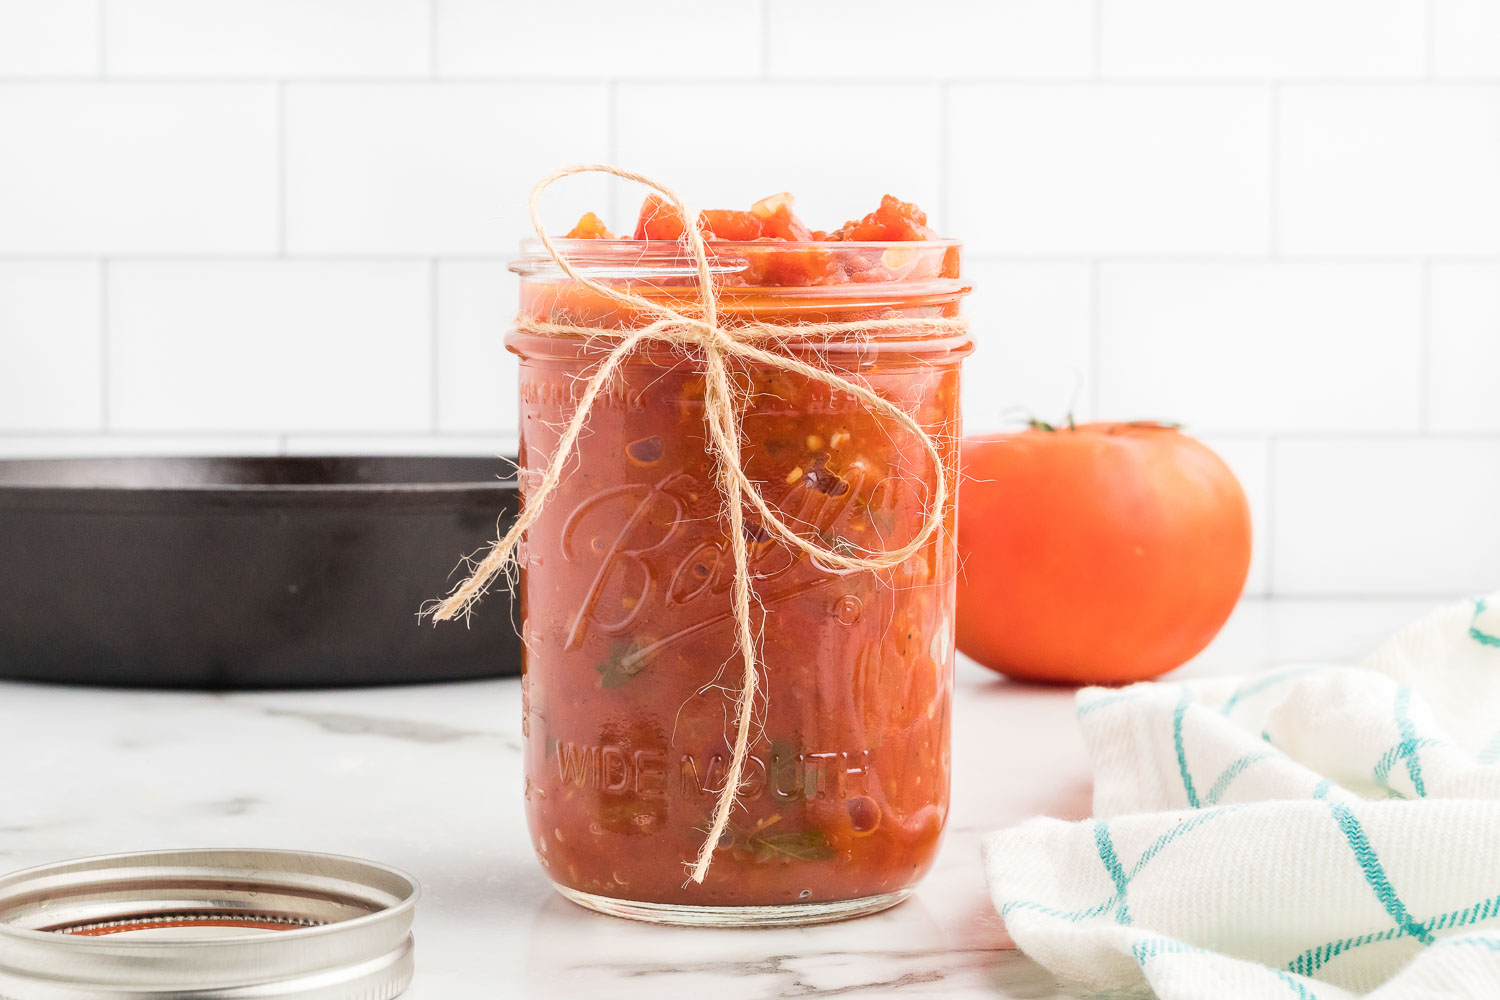 A glass jar with a bow on it filled with homemade tomato sauce  with a black pan and whole tomato behind it.